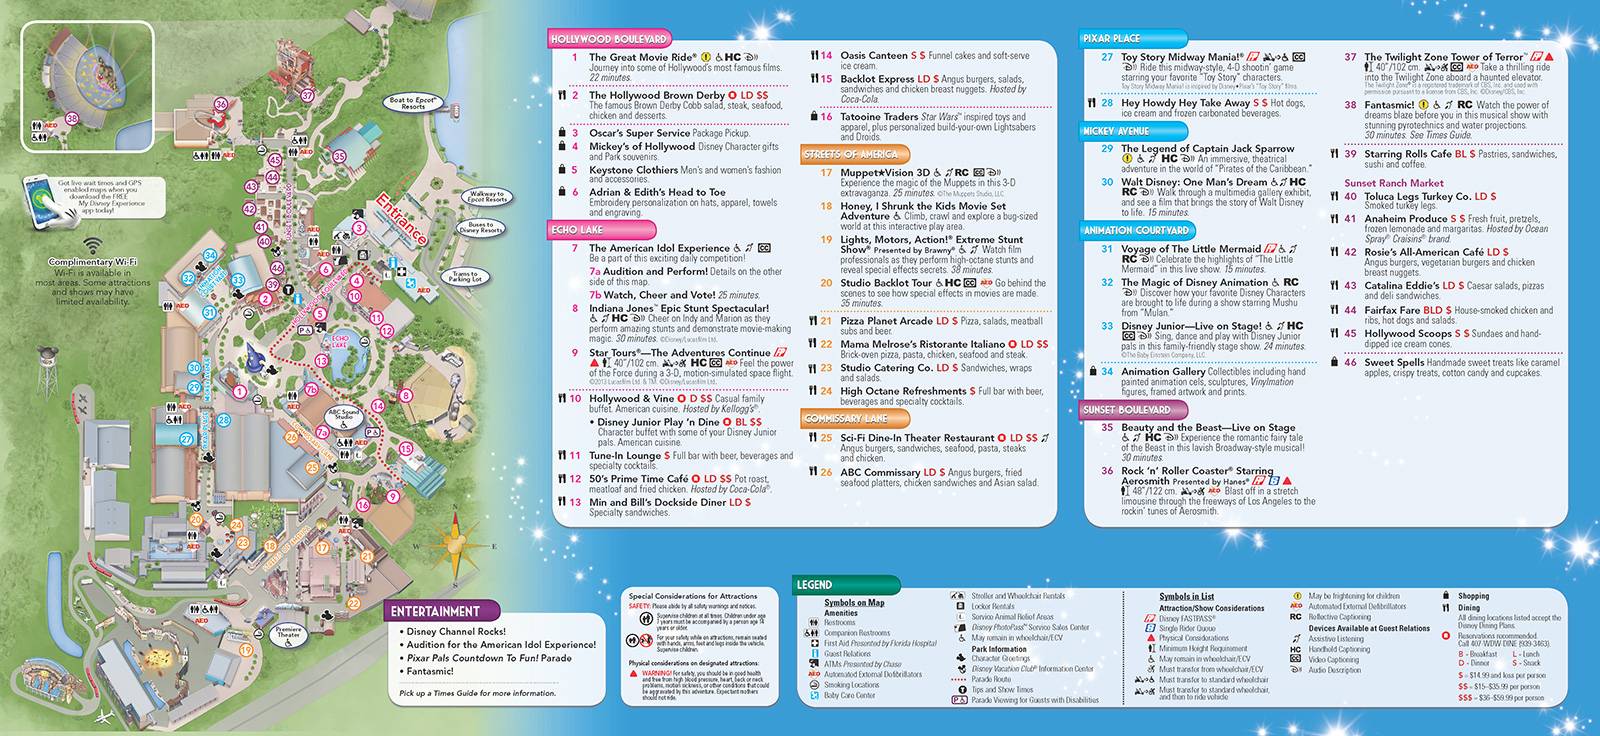 New 13 Park Maps And Times Guides Photo 3 Of